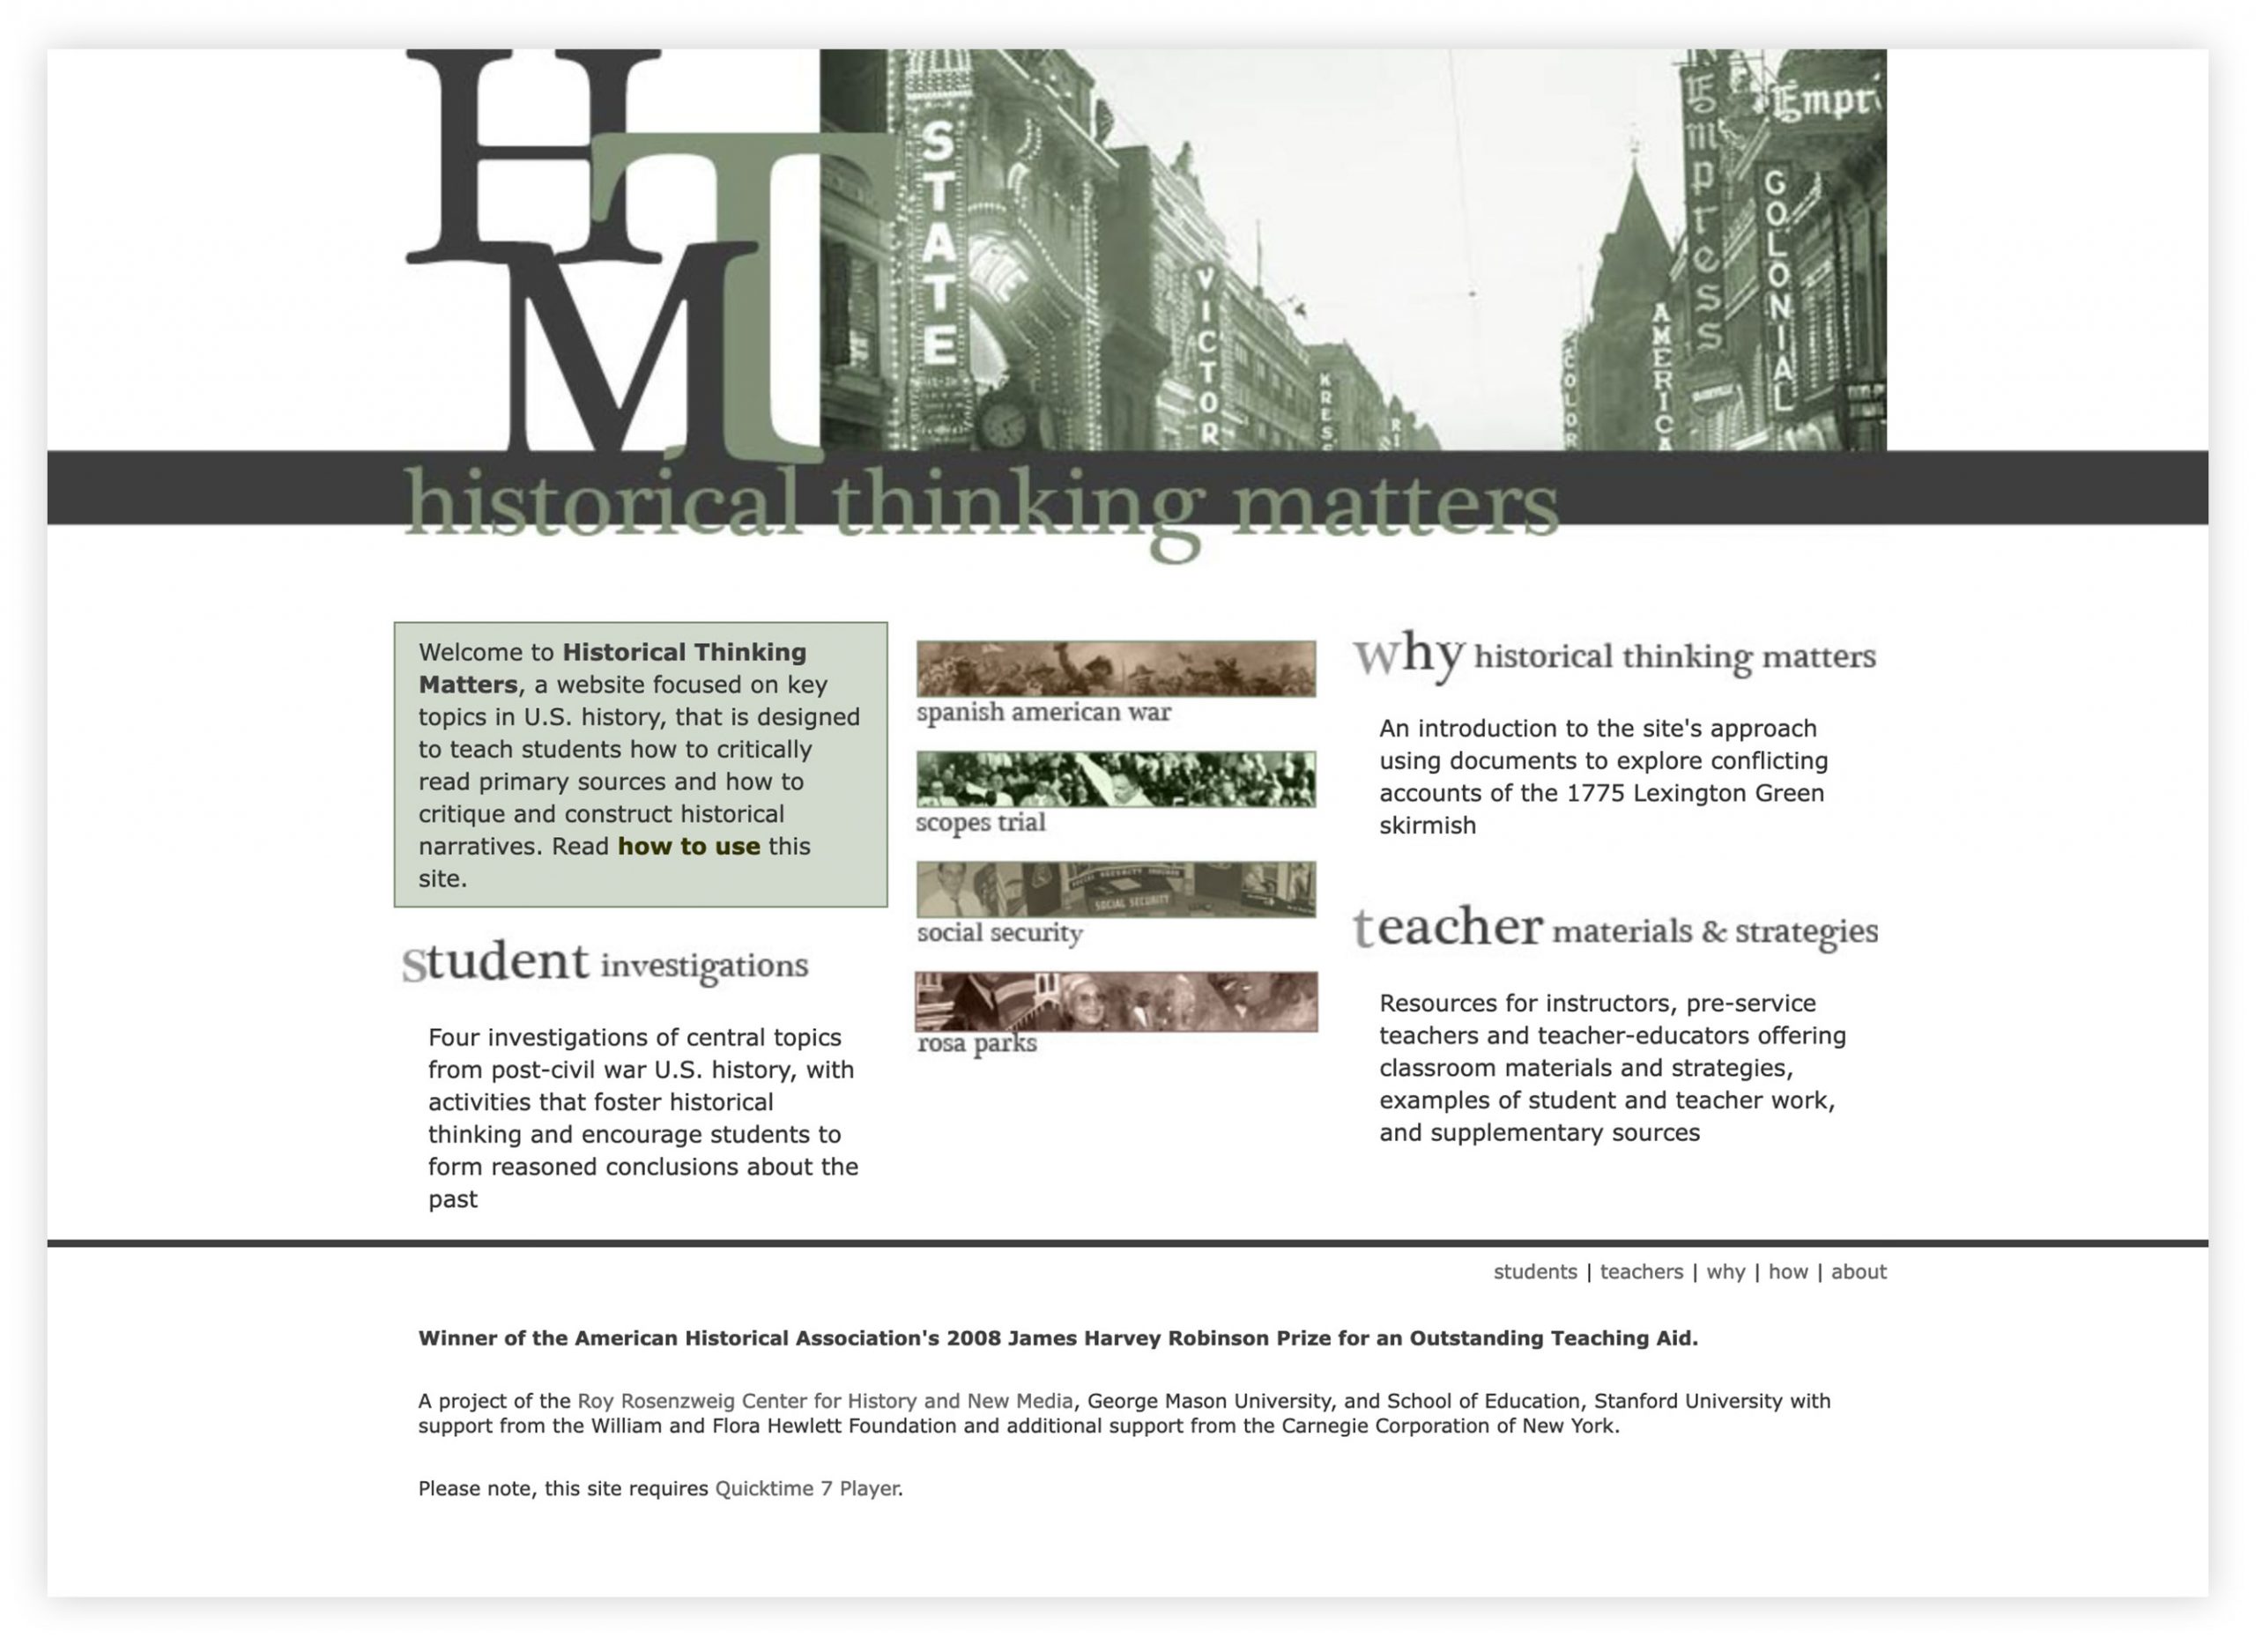 Screengrab of the Historical Thinking Matters website home page.